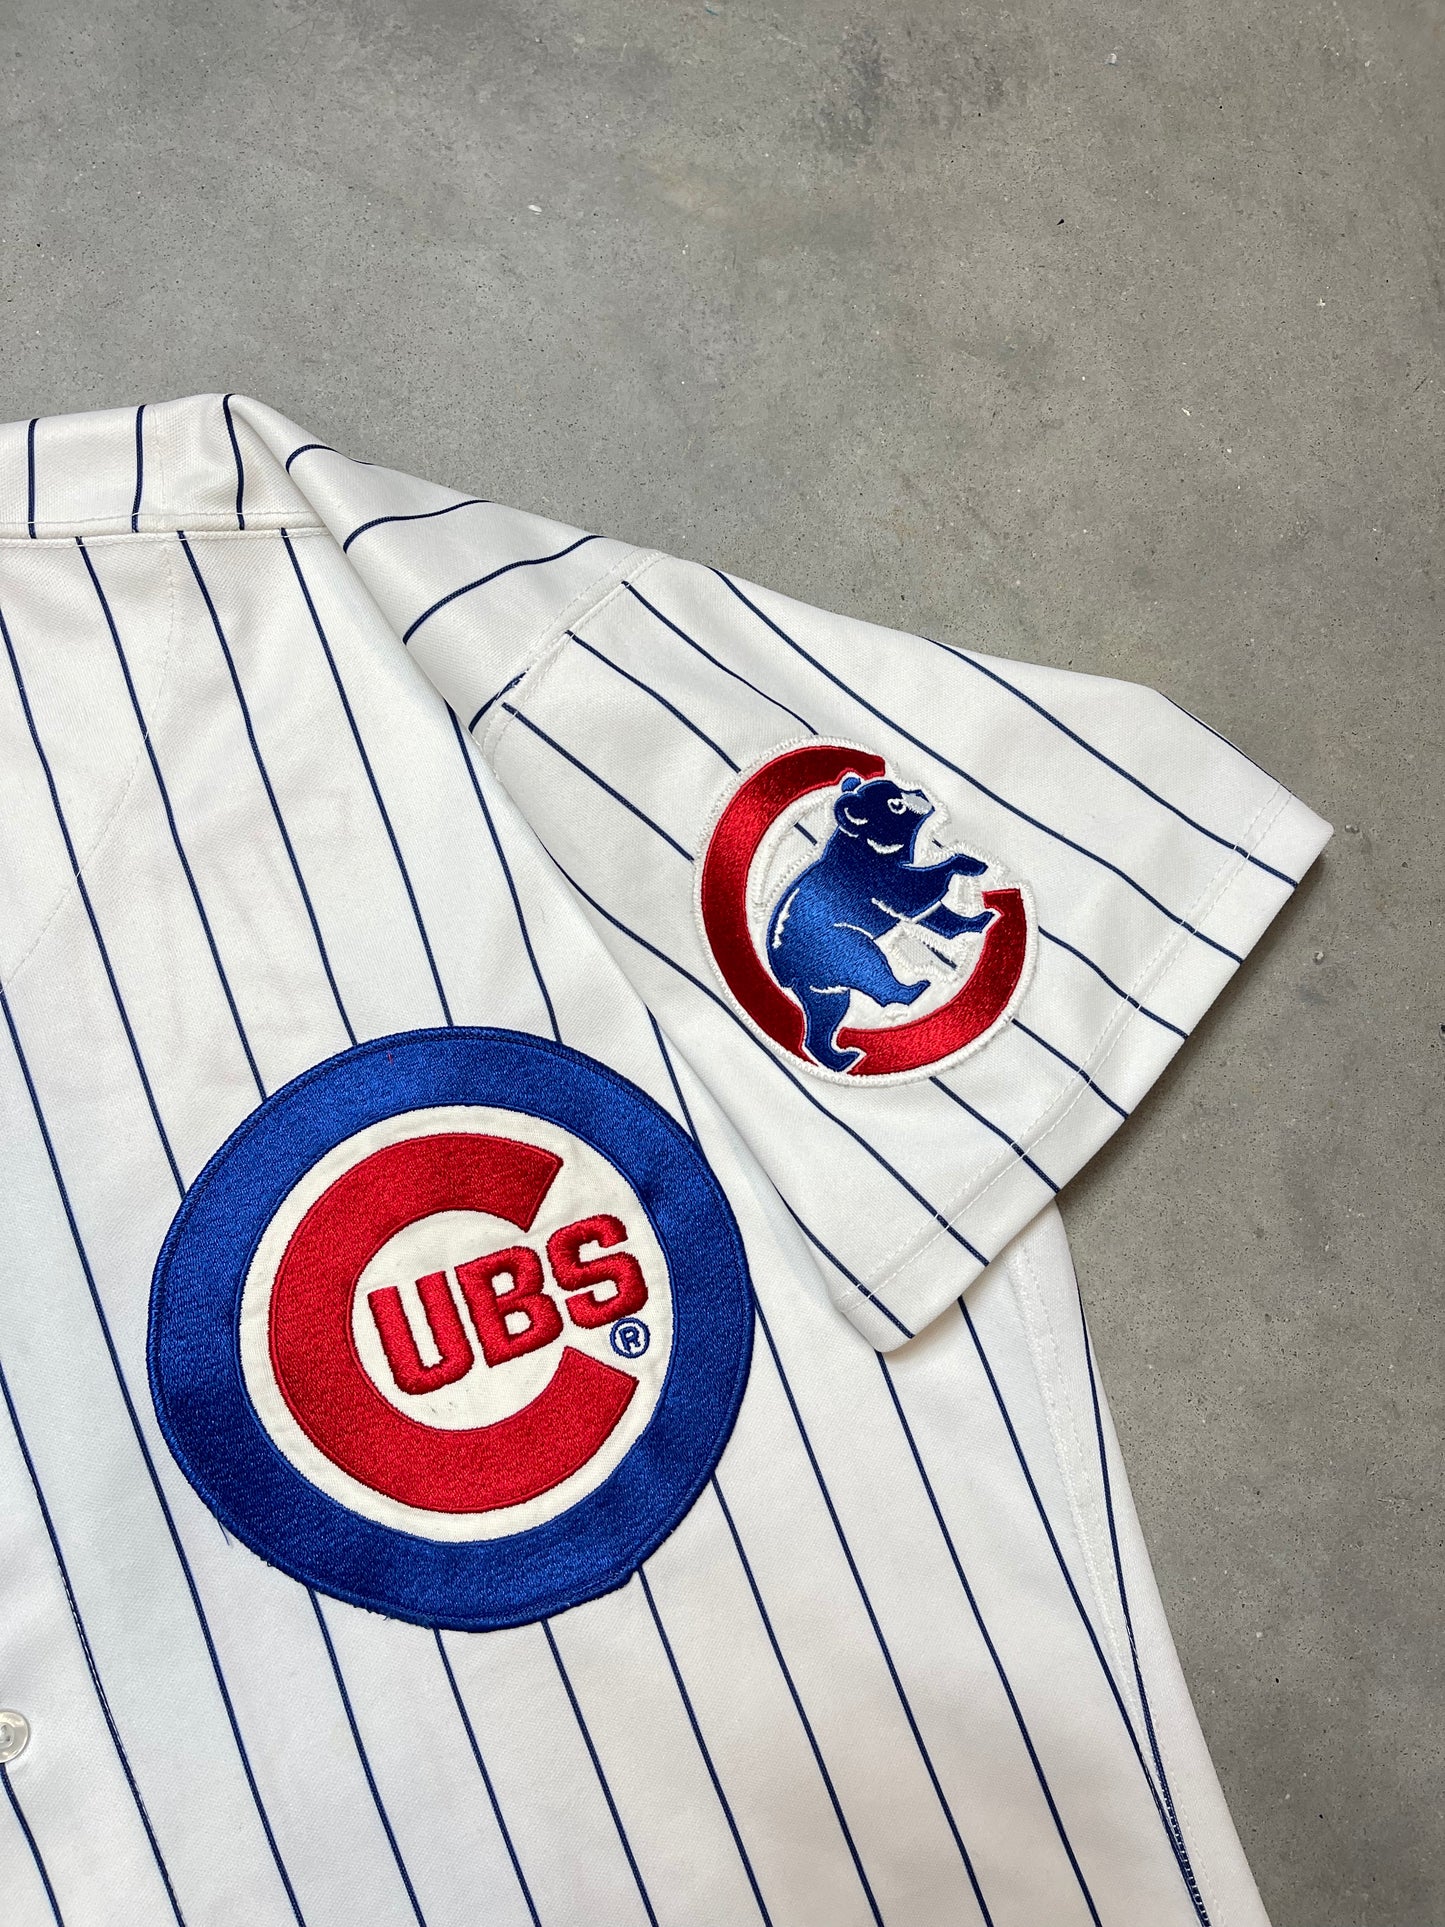 1998 Chicago Cubs Julio Zuleta Game Worn MLB Russell Athletic Home White Pinstriped Harry Carey Patch Jersey (50/XXL)